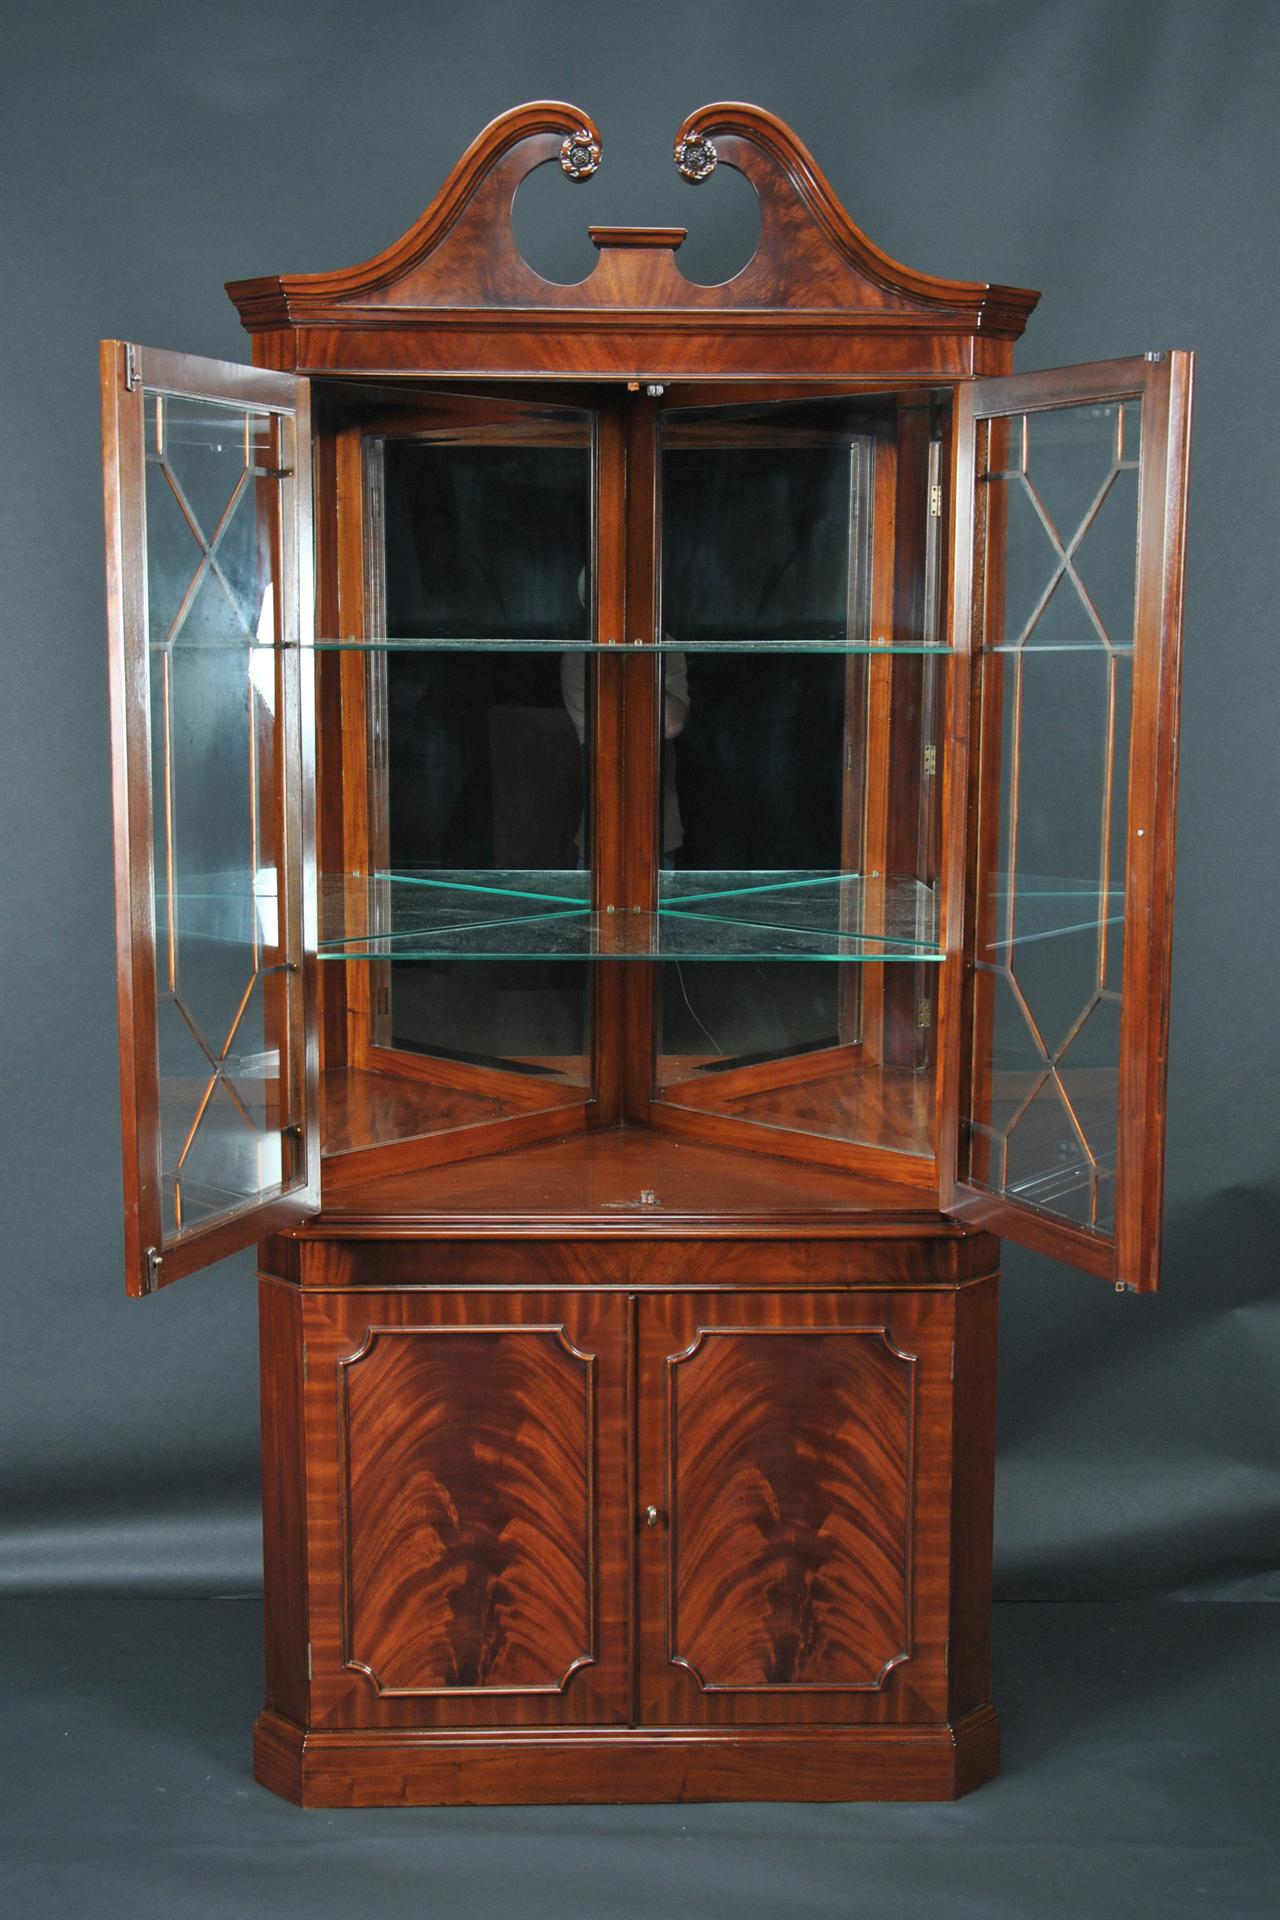 Corner China Cabinet or Corner Hutch for the Dining Room | eBay